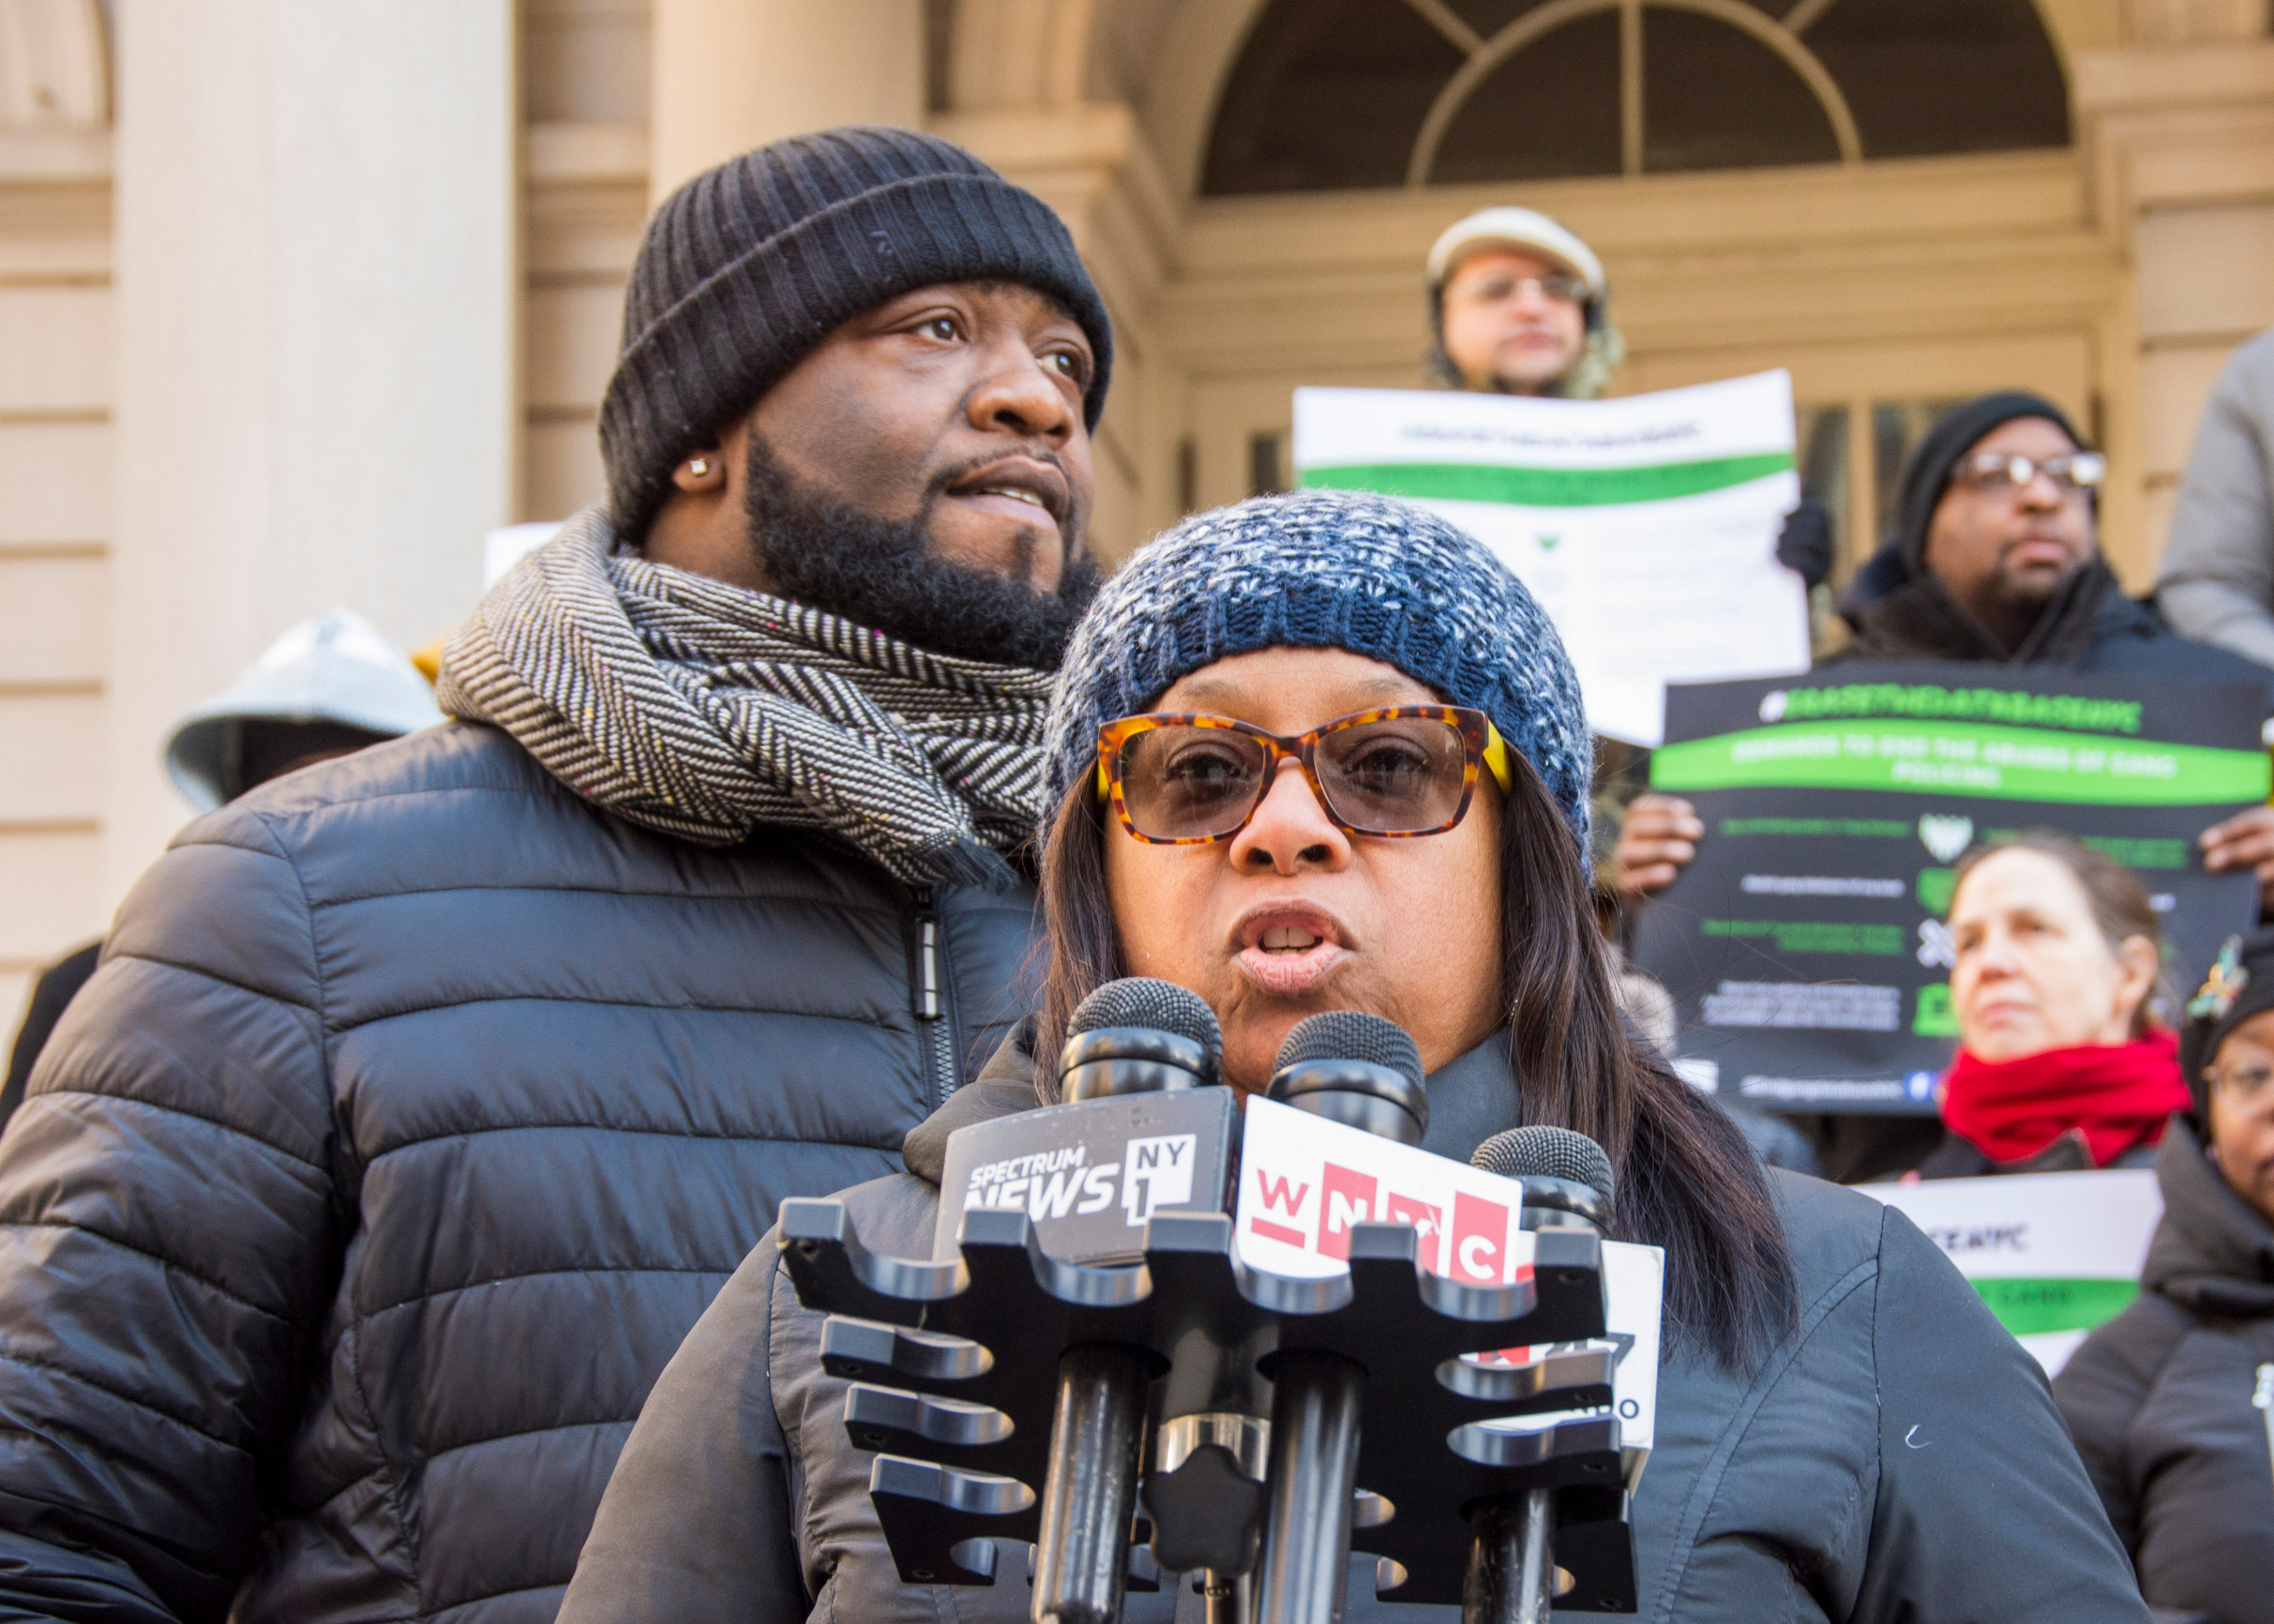 Donnell Murray’s mother, Darlene Murray, speaks out for her son at a rally in New York City.